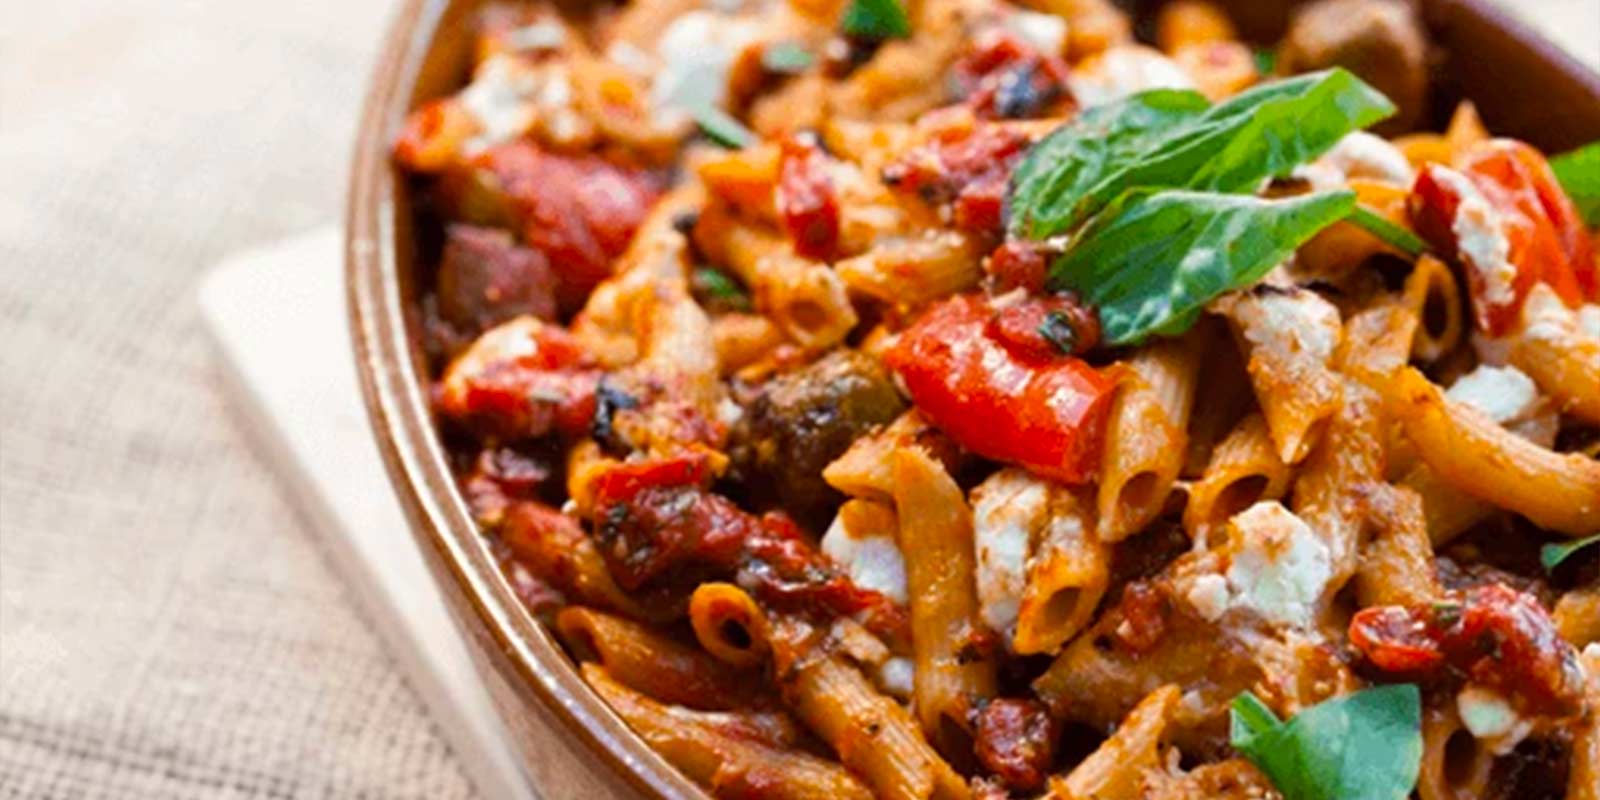 Wildfire Penne Pasta with Roasted Vegetables